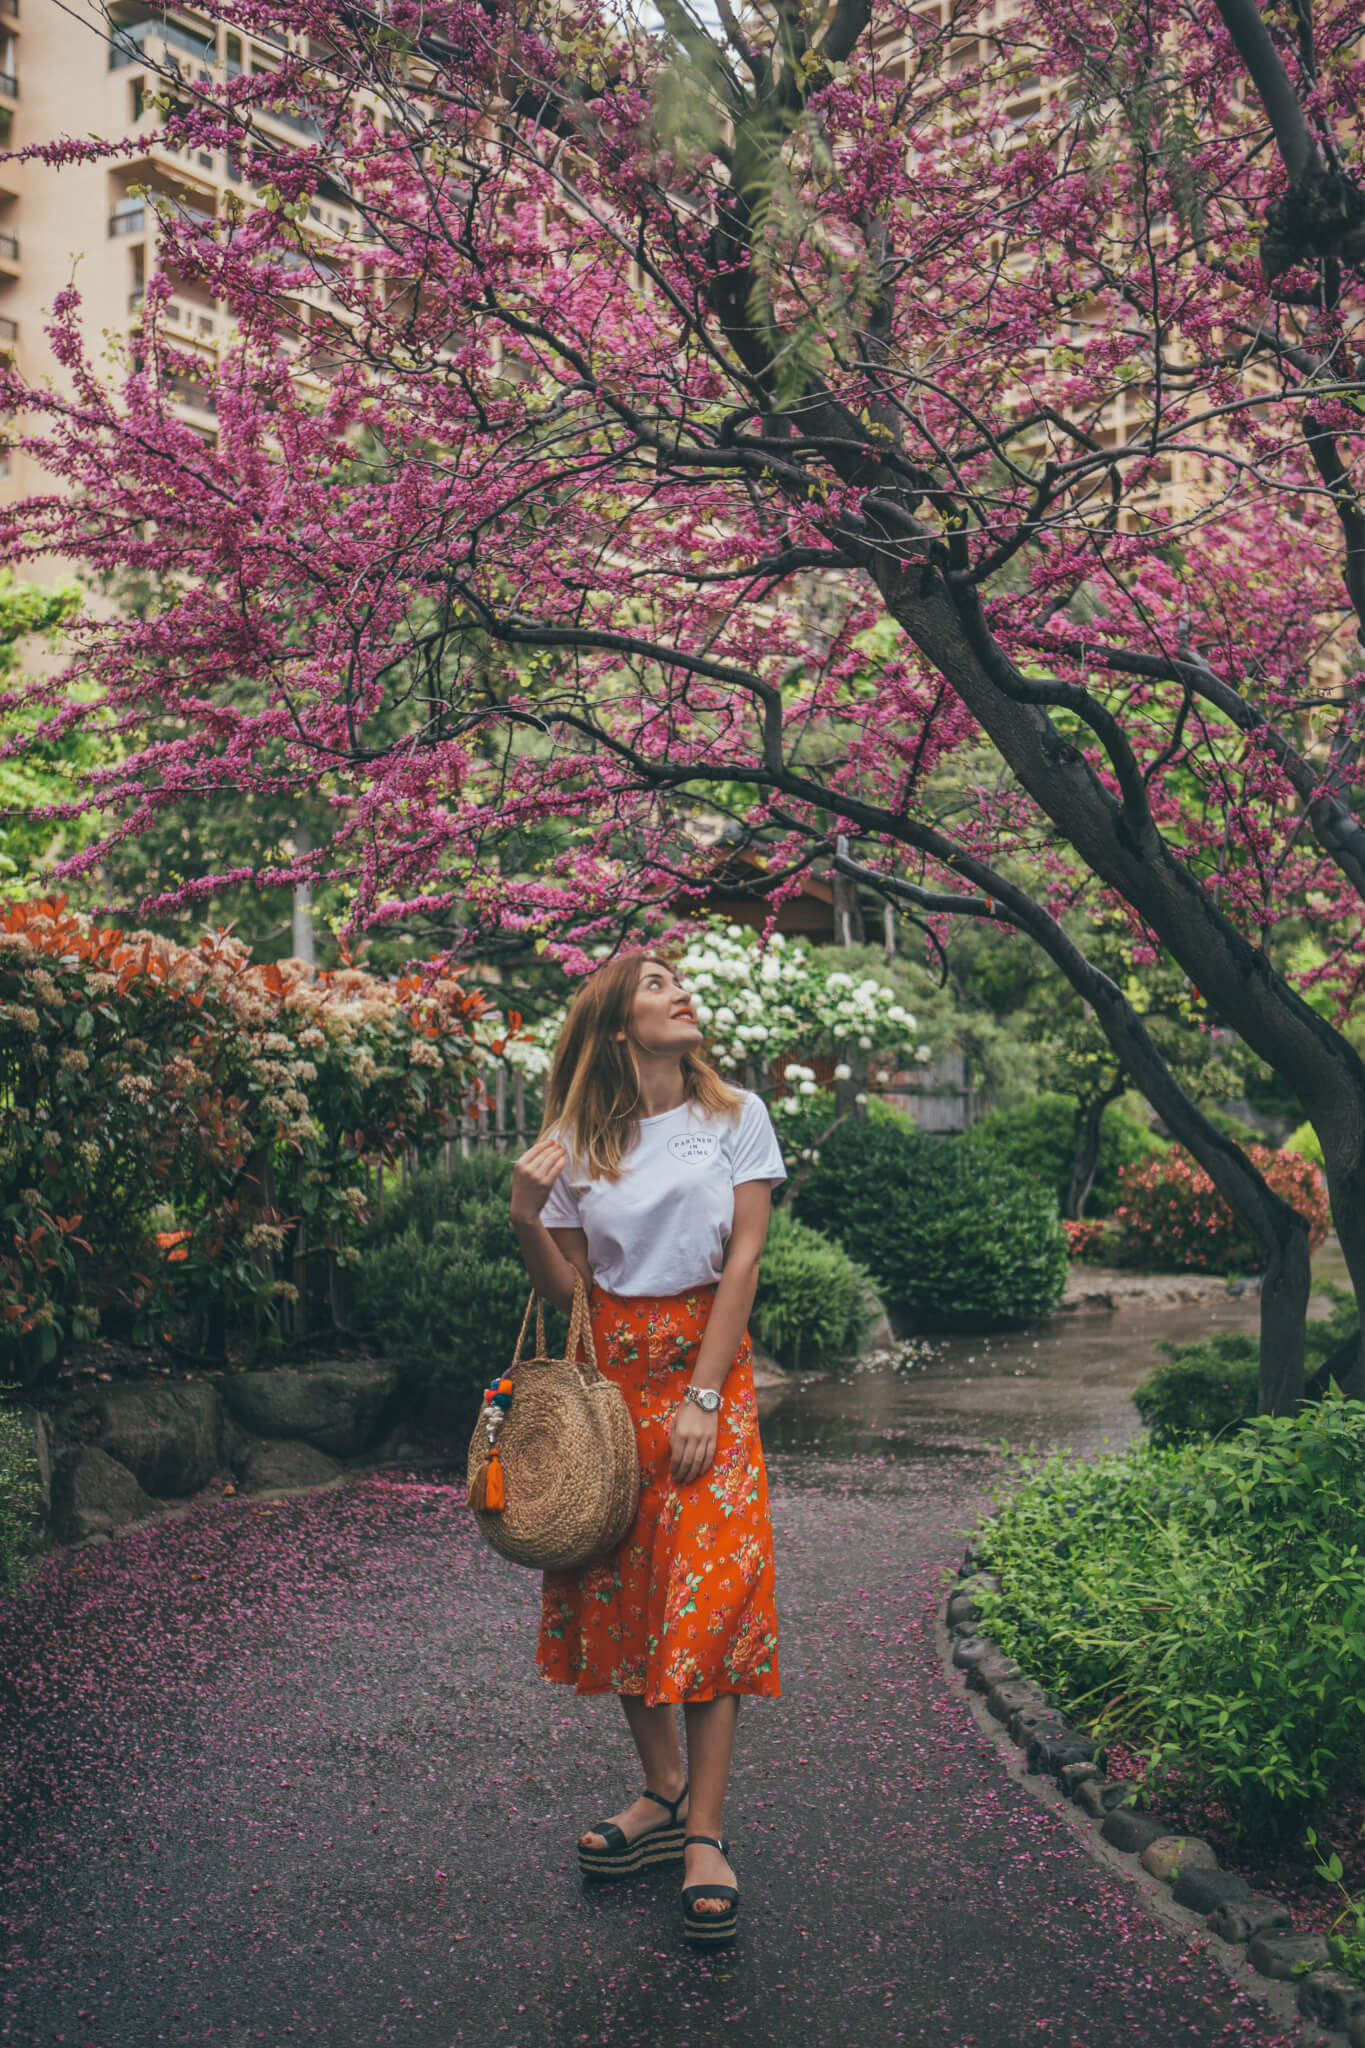 And-Other-Stories-Japanese-Garden-6-of-12-1 Japanese Garden Monaco - What I Wore